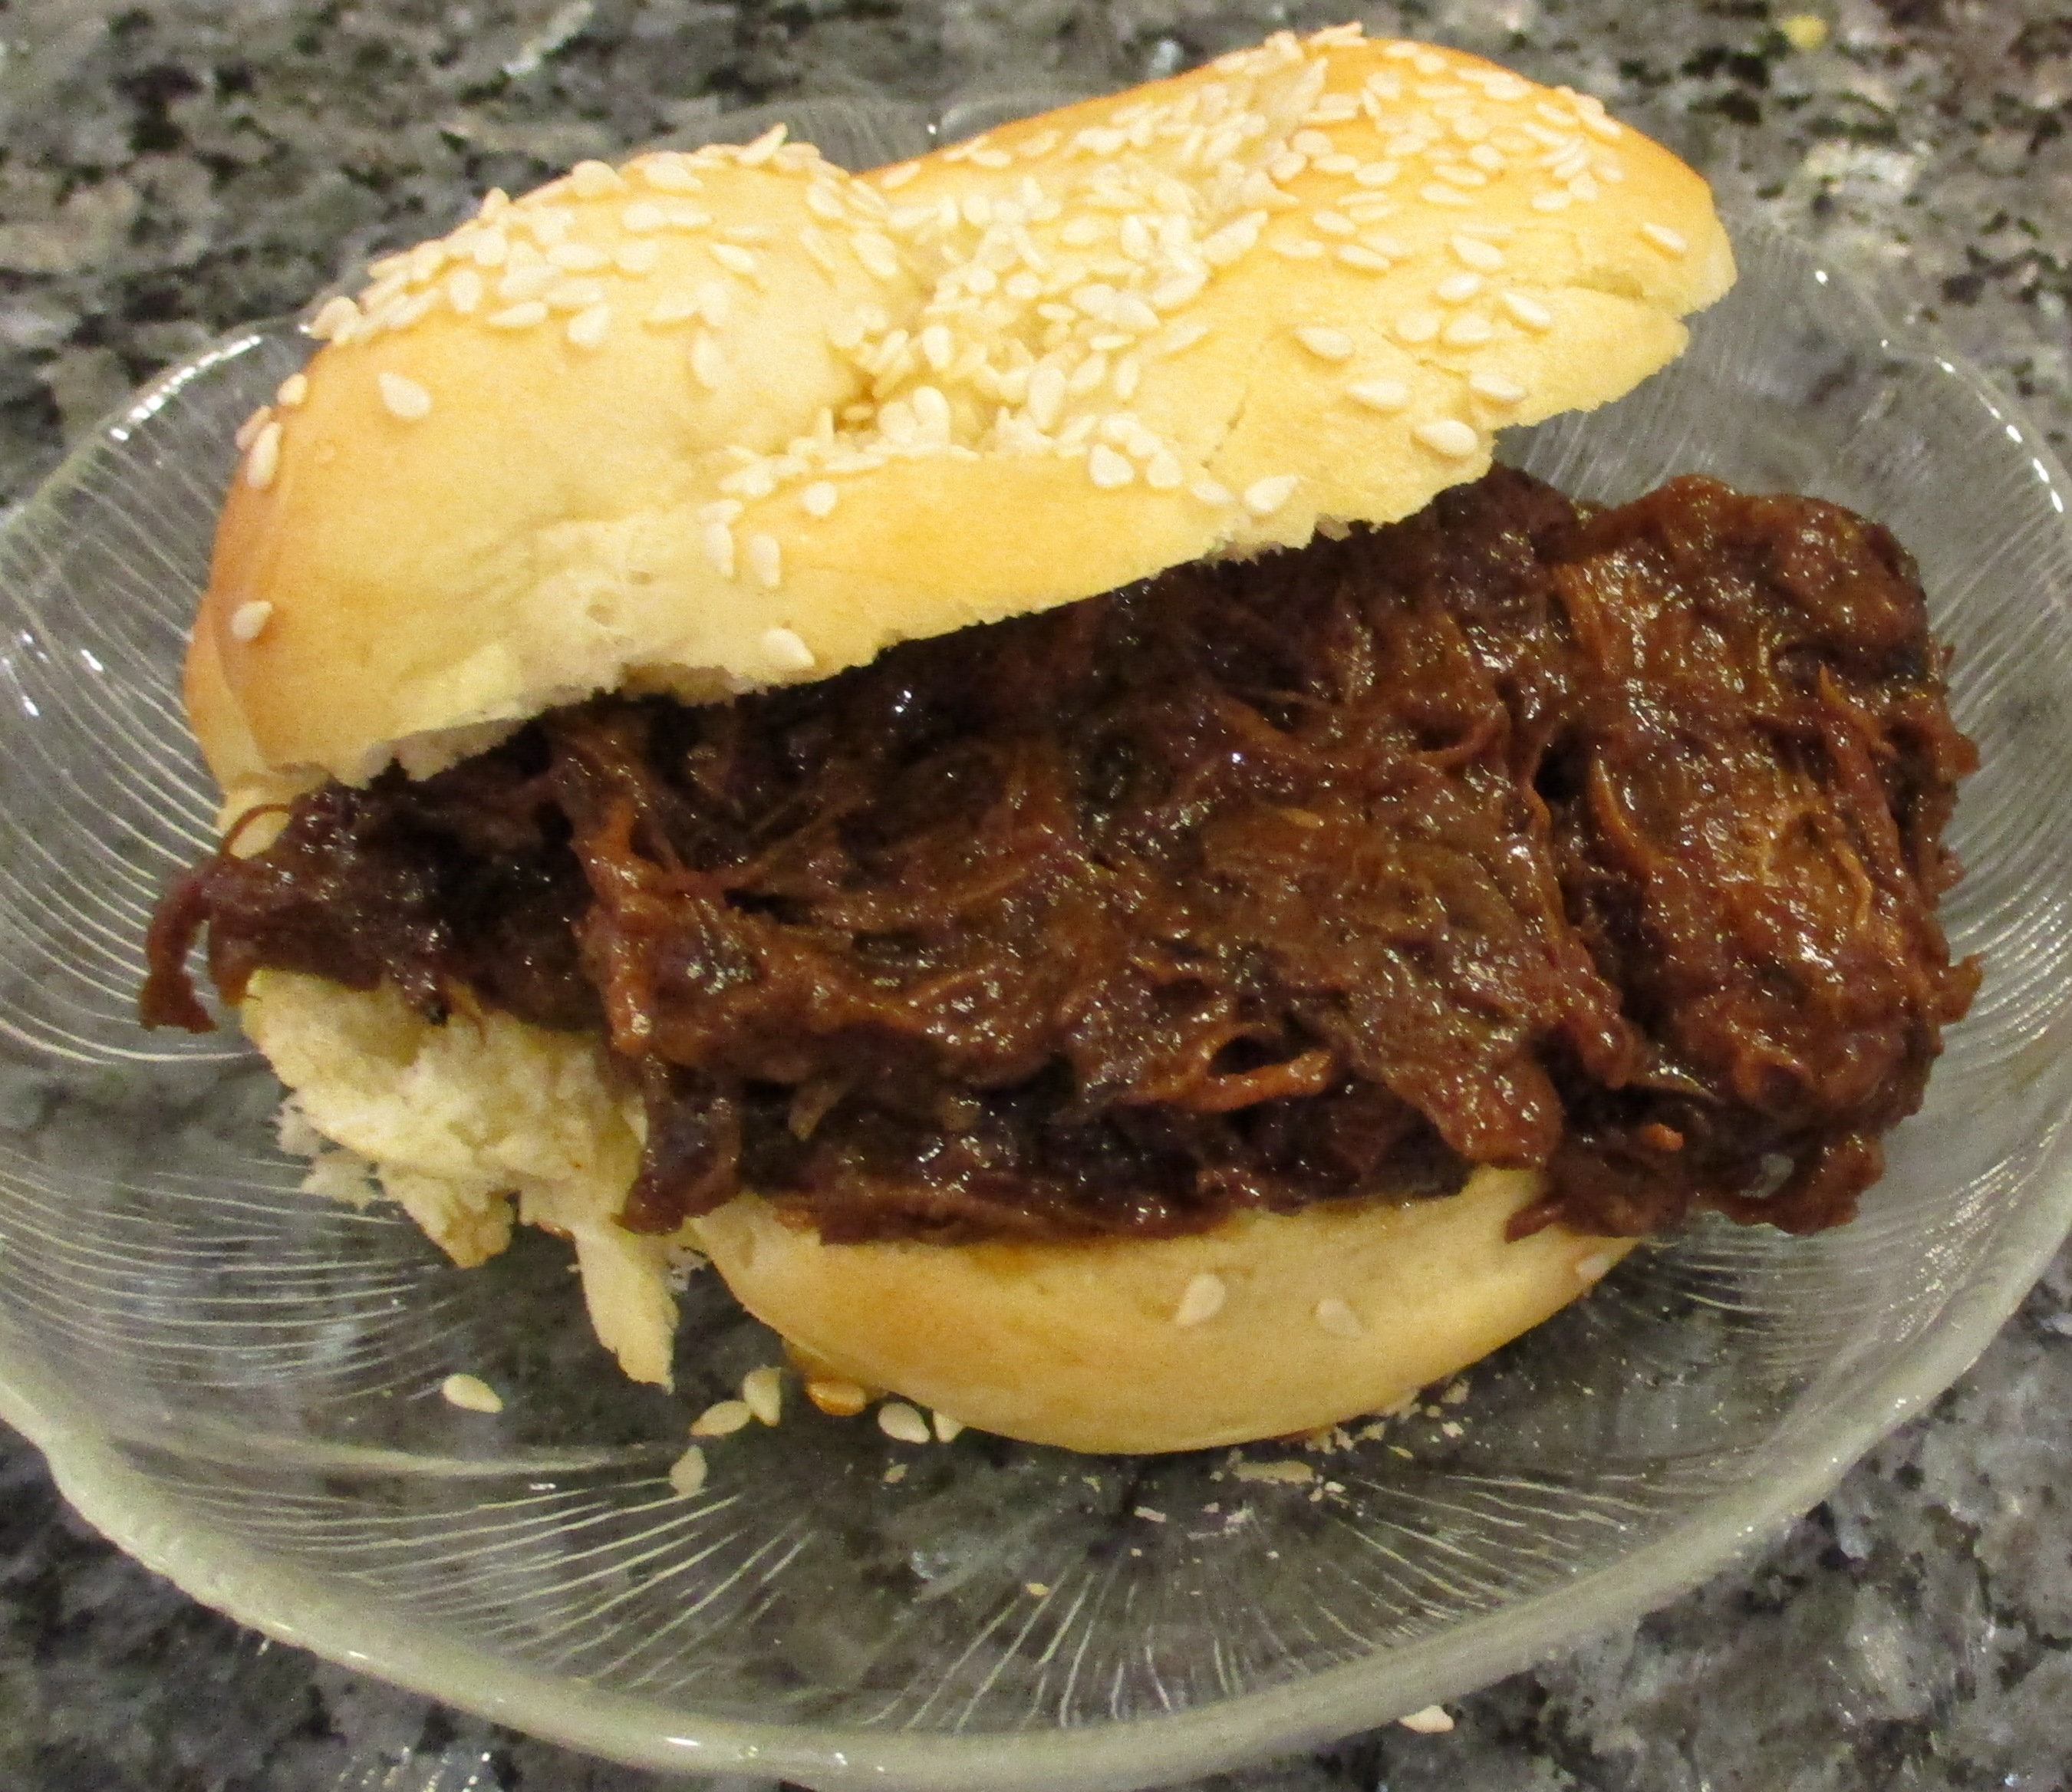 IP Shredded Beef with Caramelized Onion Sandwiches